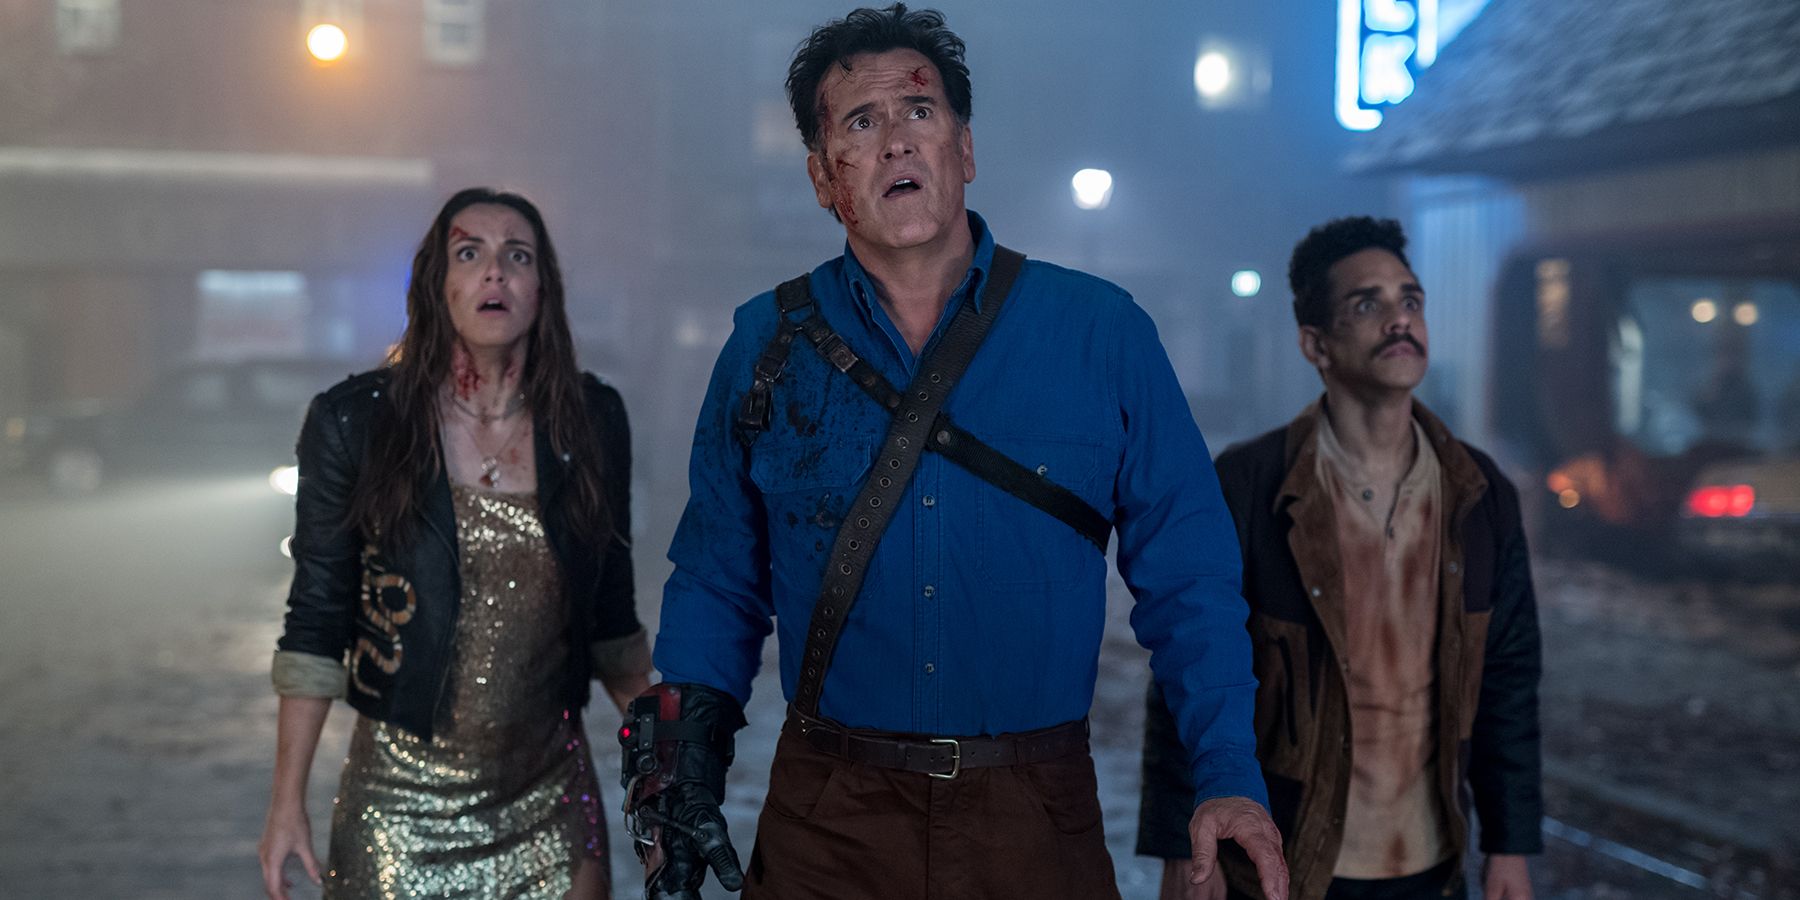 Evil Dead 10 Groovy Ash Williams Facts Every Fan Should Know